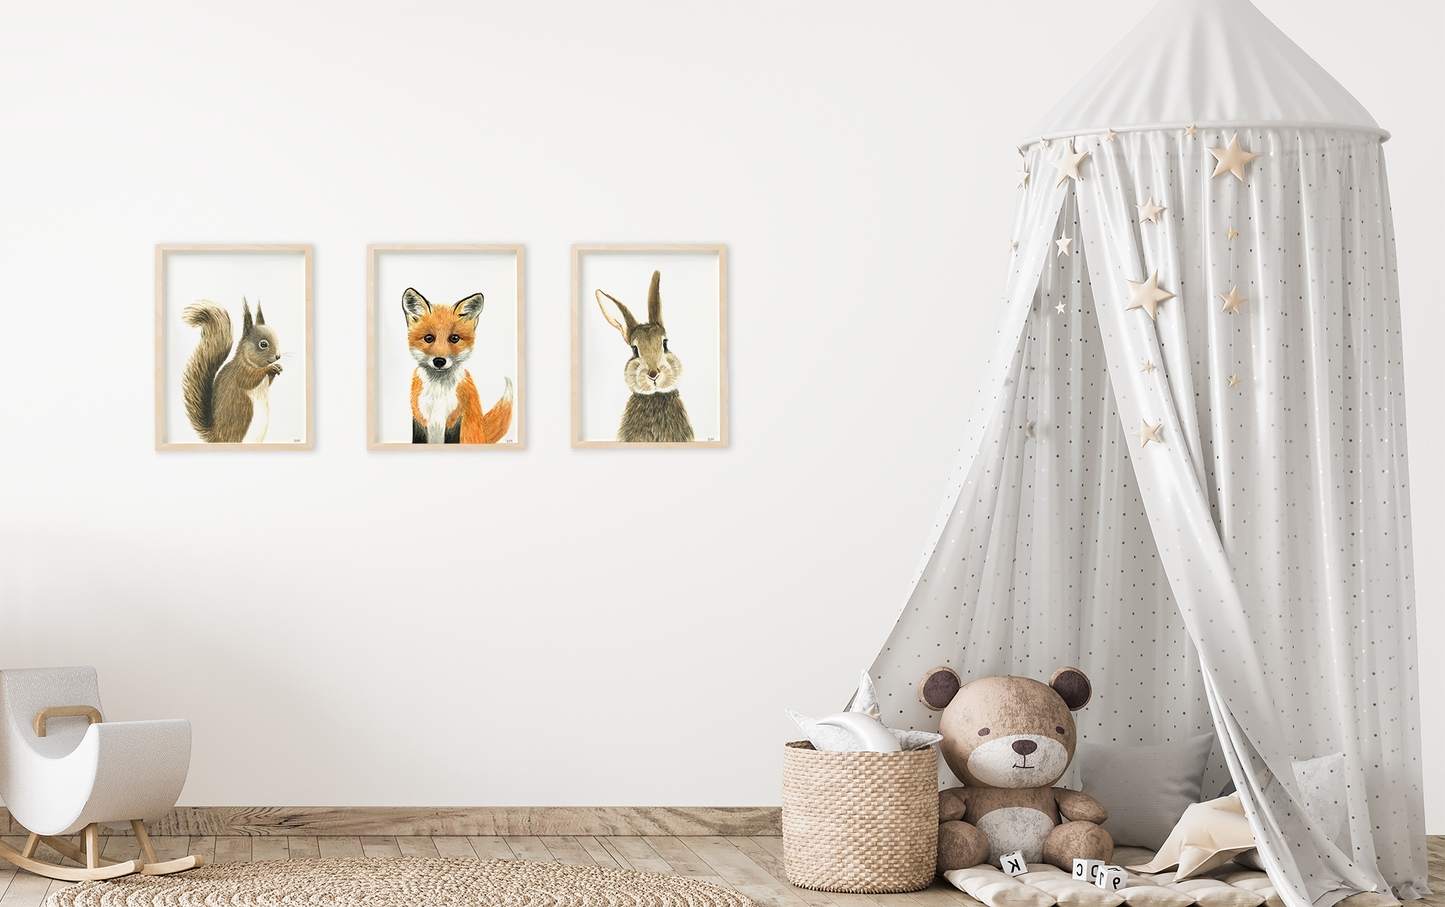 Set of 3 woodland animal prints in a kids' room or babyroom: squirrel, fox, and rabbit